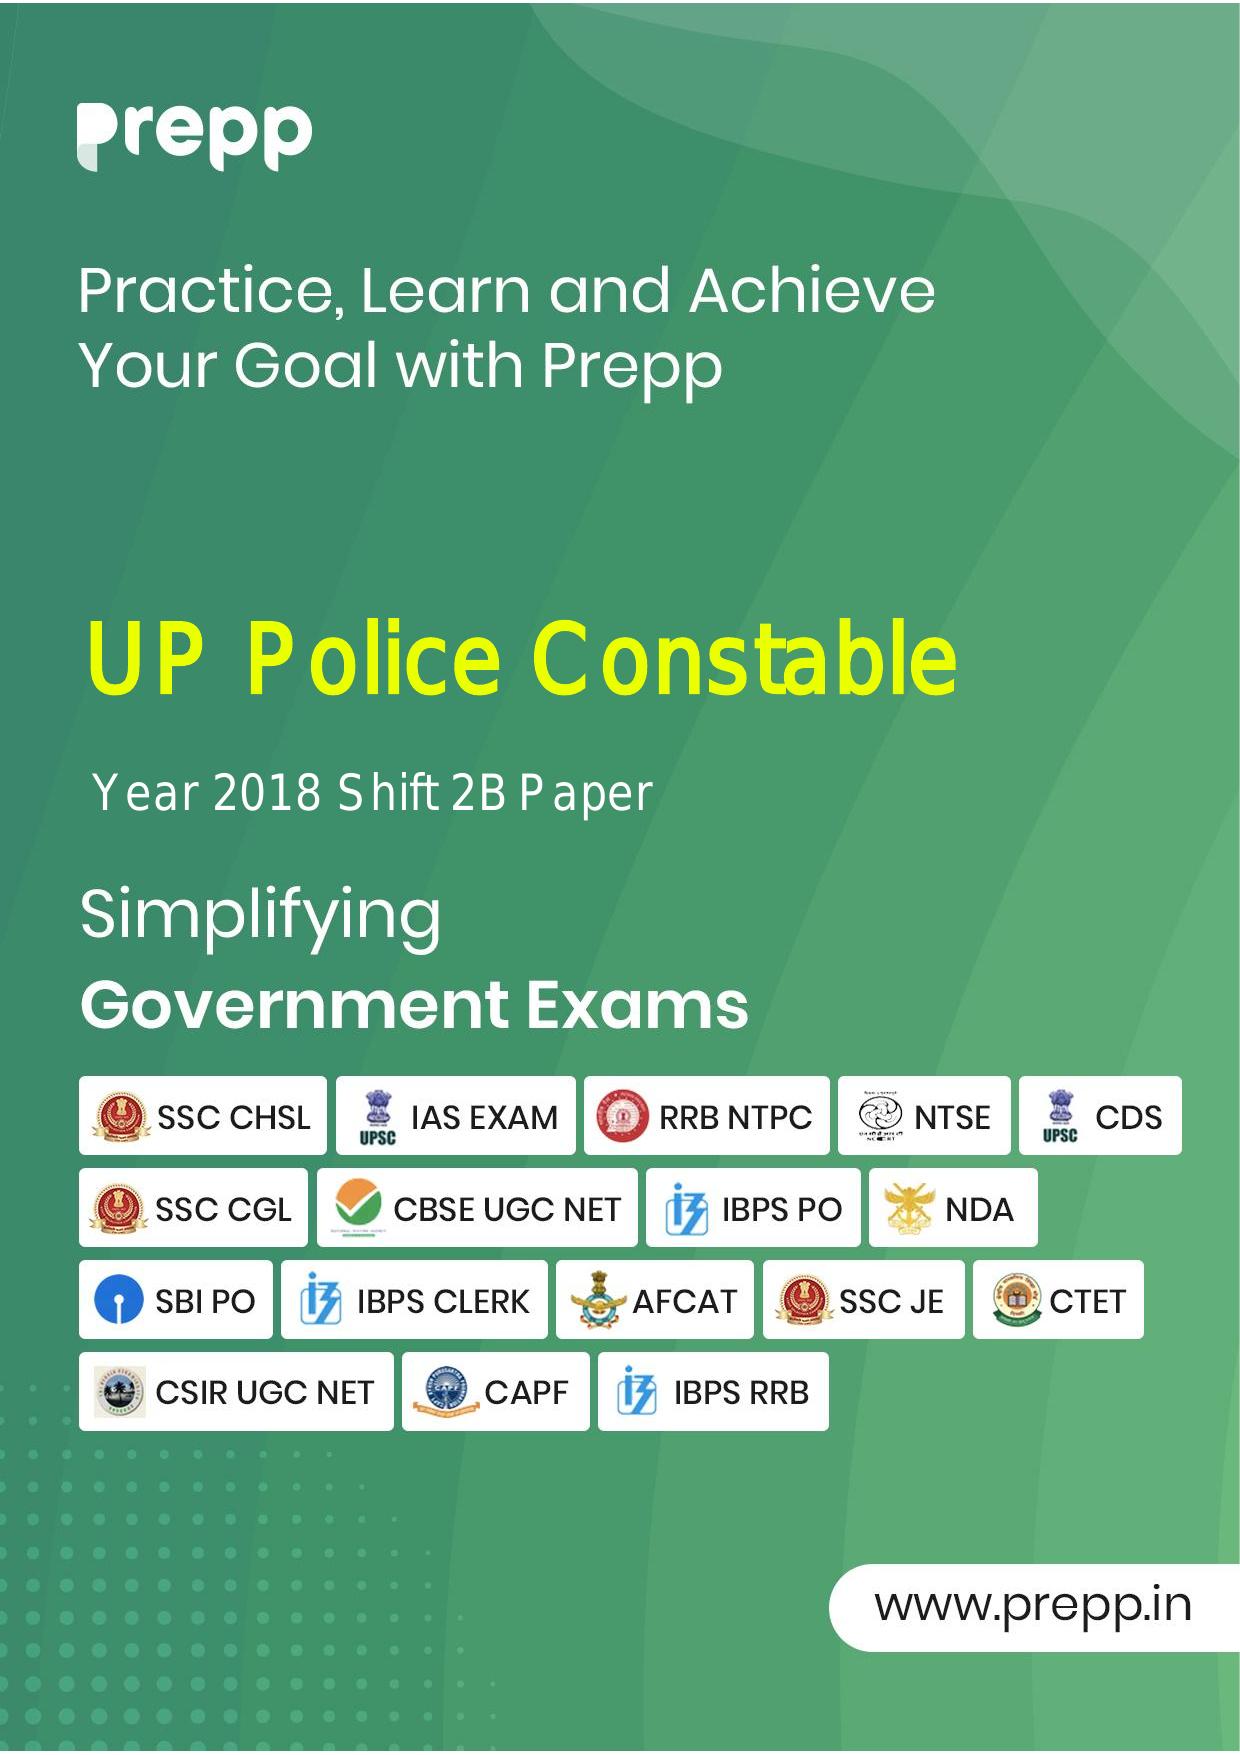 UPPRPB Police Constable Question Papers Shift 2 B Paper - Page 1